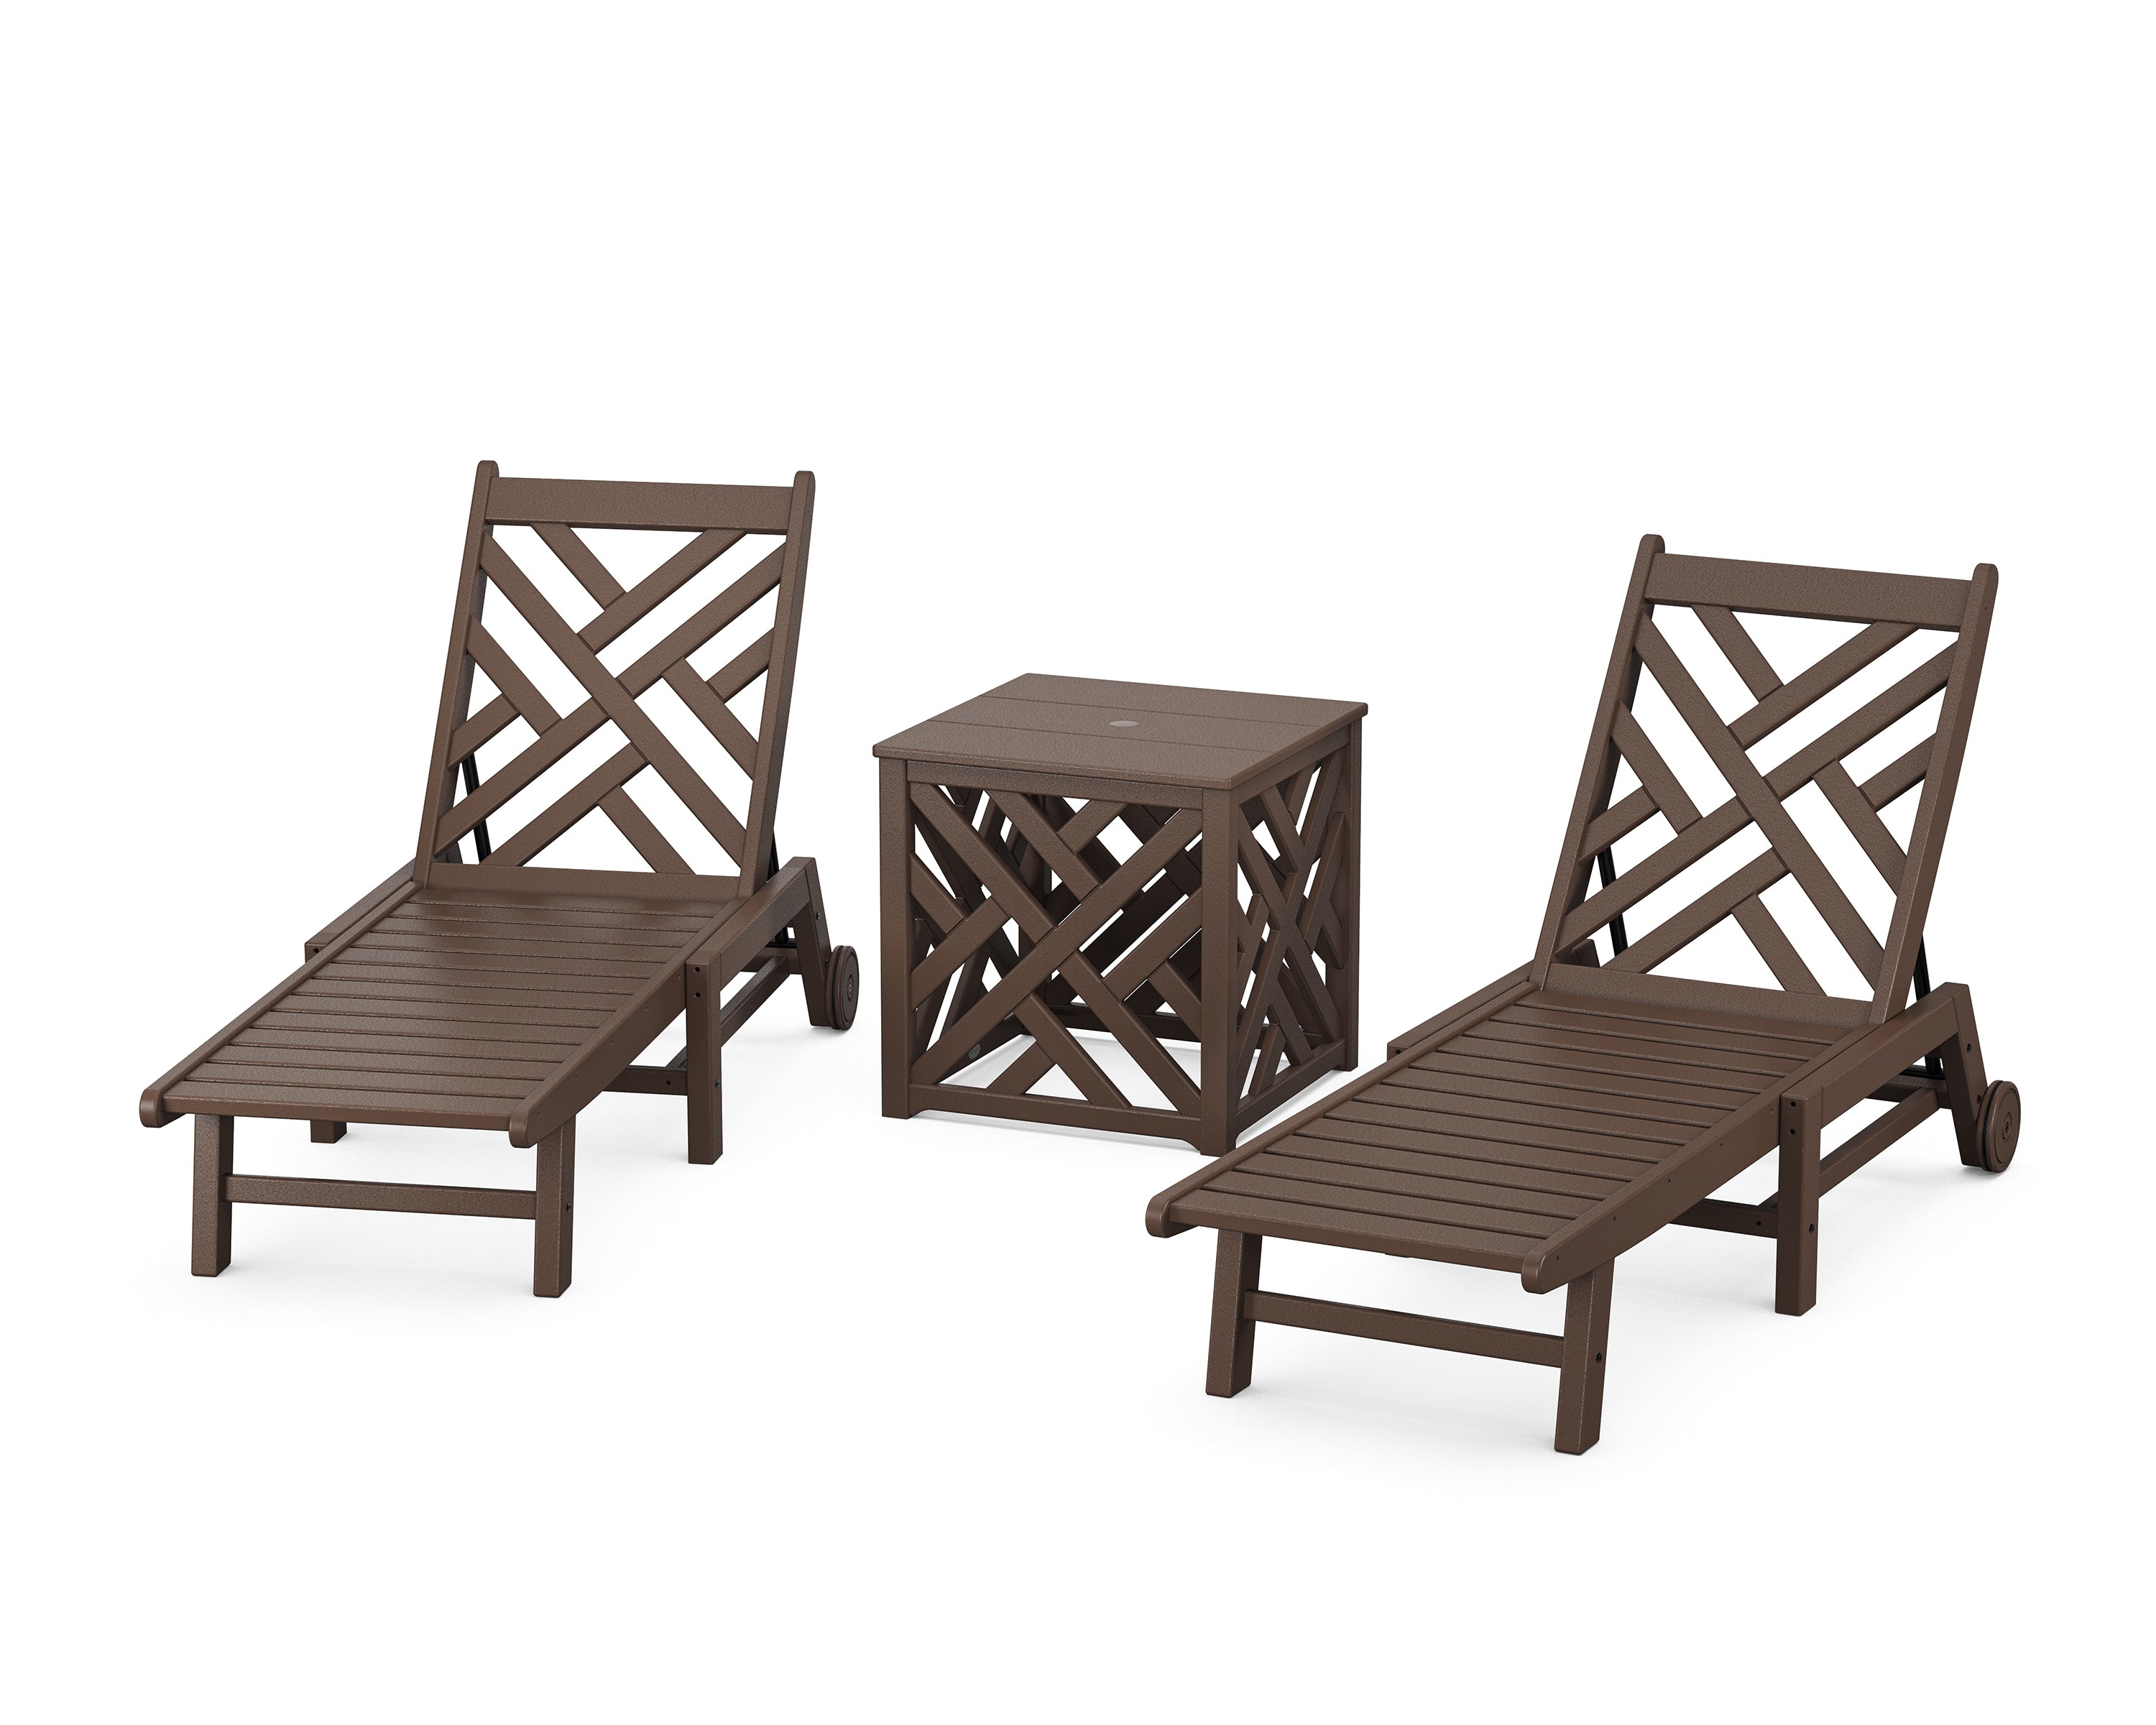 POLYWOOD Chippendale 3-Piece Chaise Set with Wheels and Umbrella Stand Accent Table in Mahogany